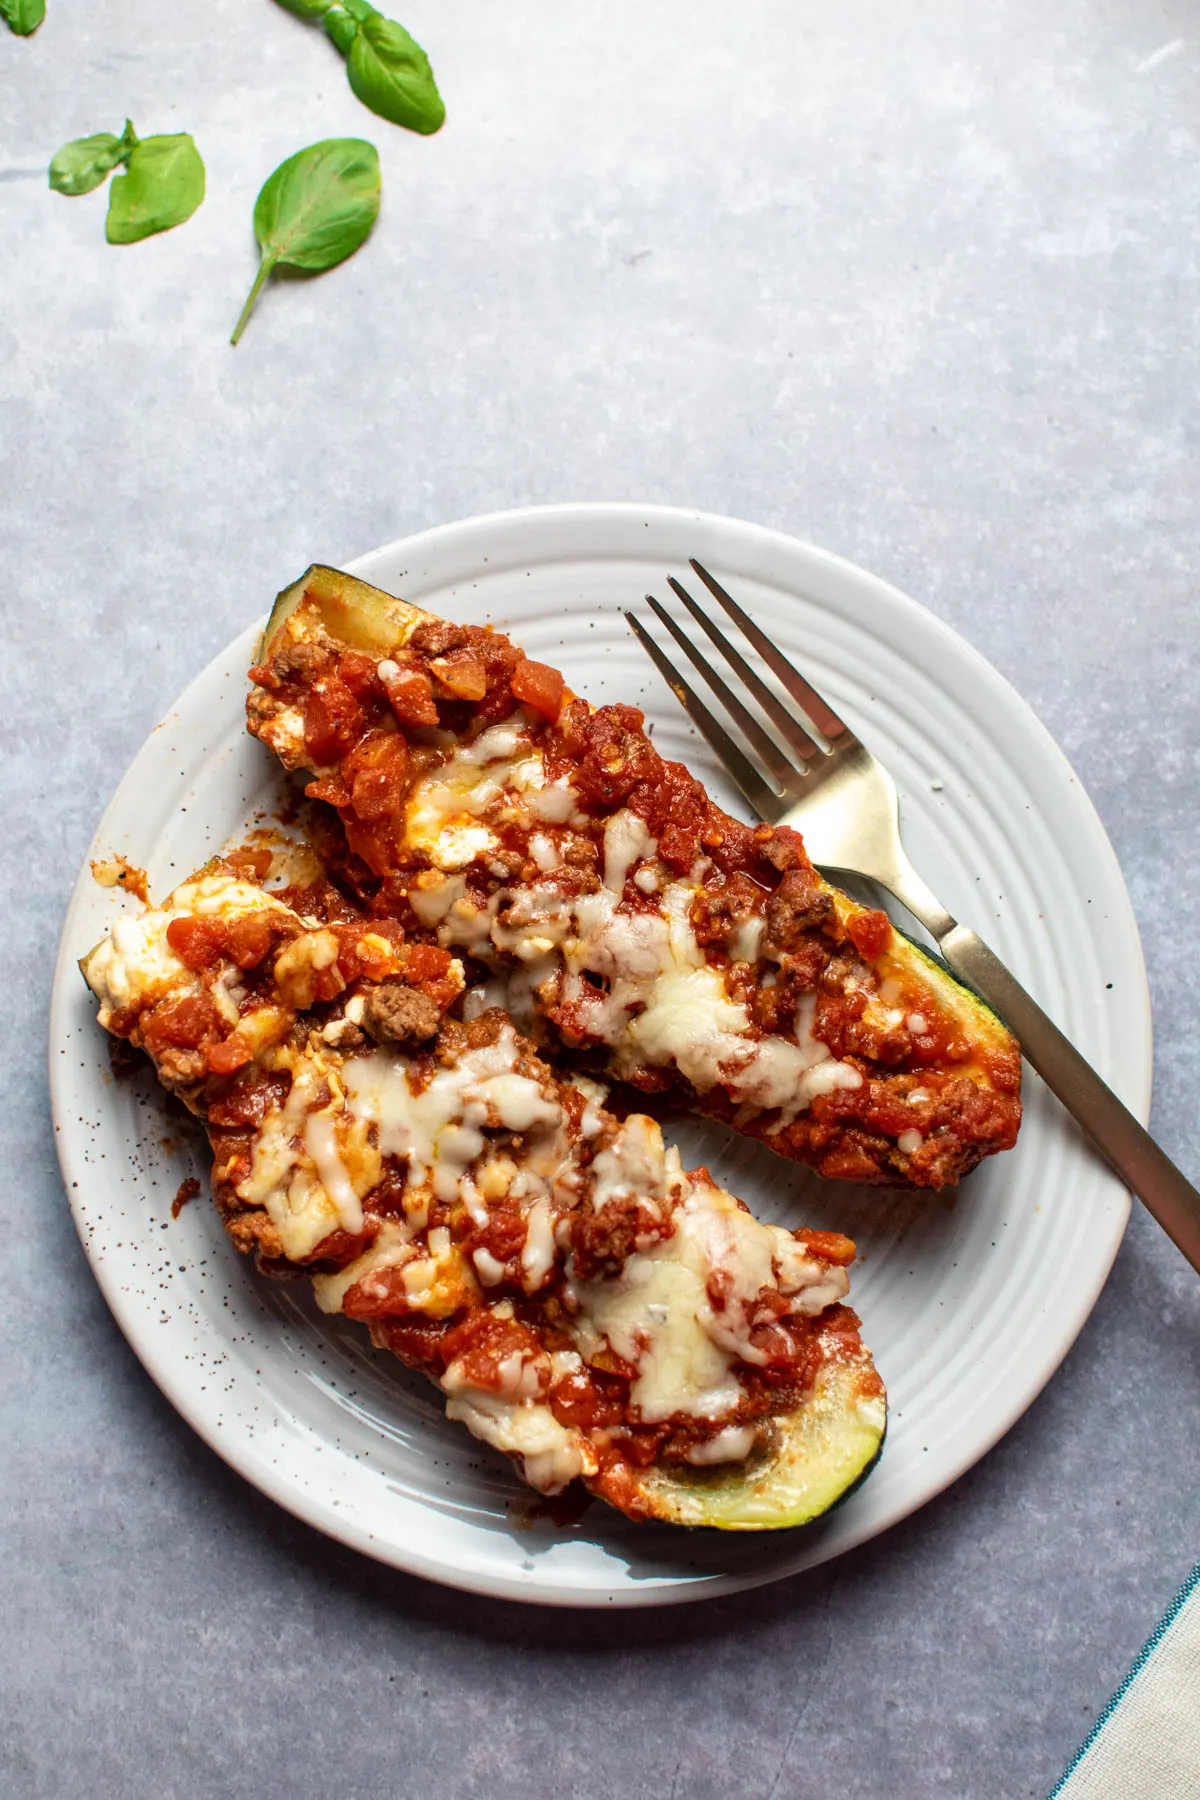 Two lasagna zucchini boats and gold fork on a plate with fresh basil leaves scattered nearby.